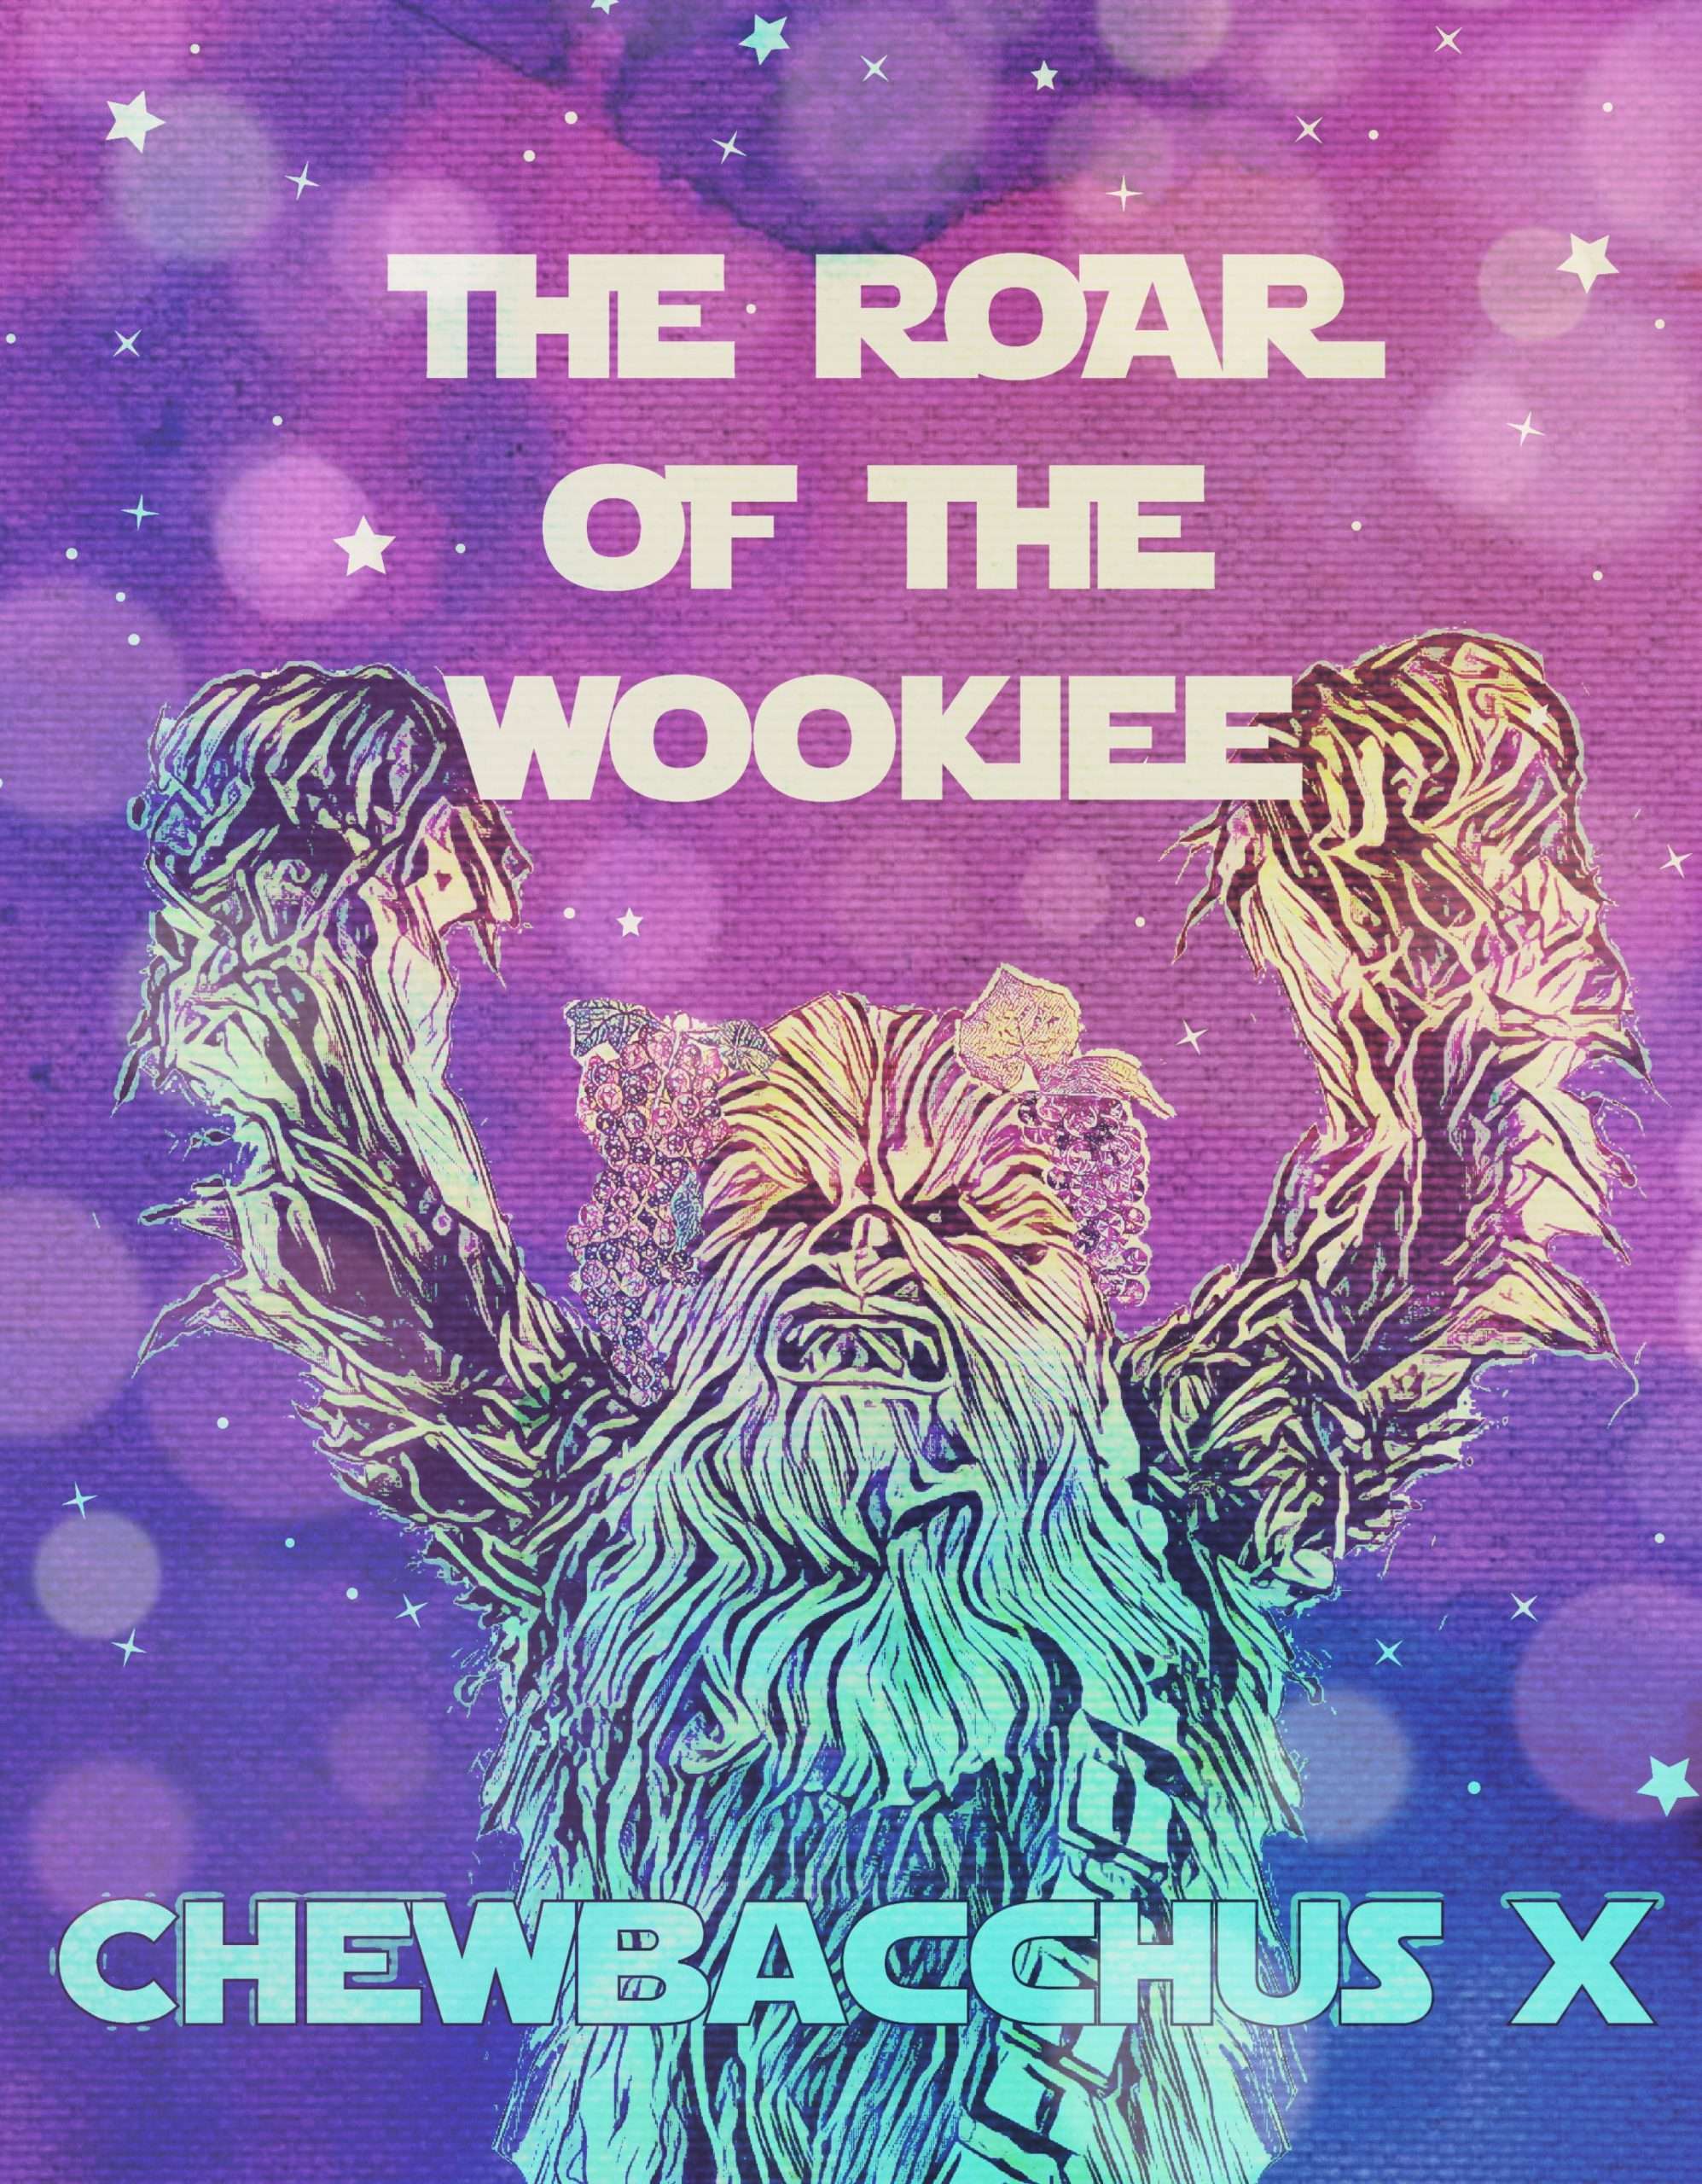 Chewbacchus X: The Roar of the Wookiee